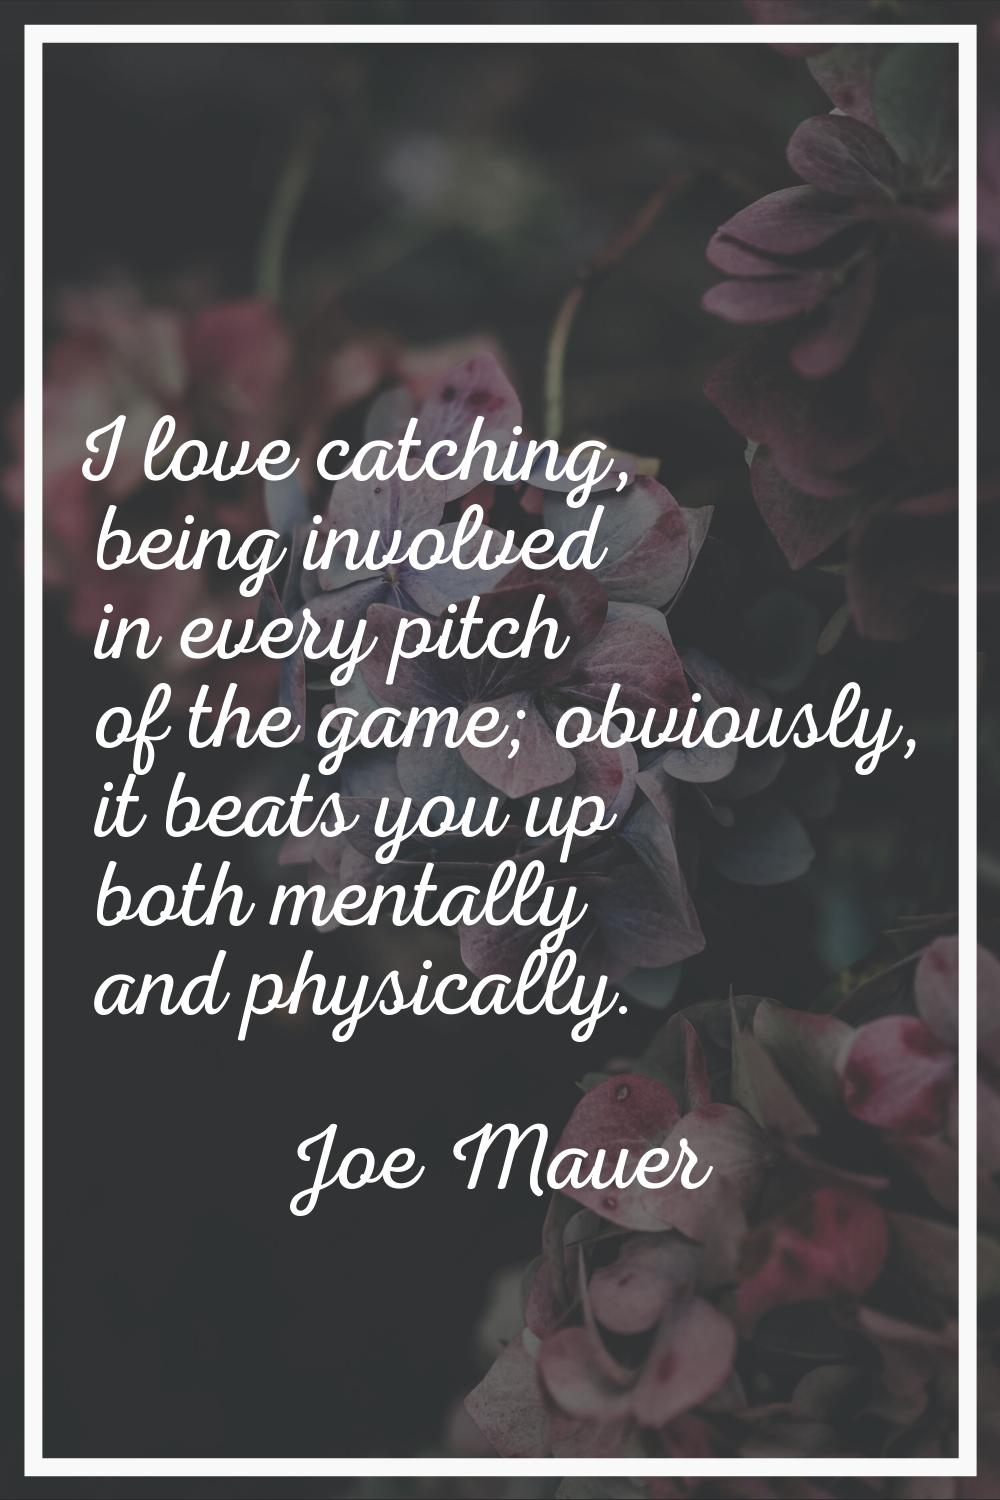 I love catching, being involved in every pitch of the game; obviously, it beats you up both mentall